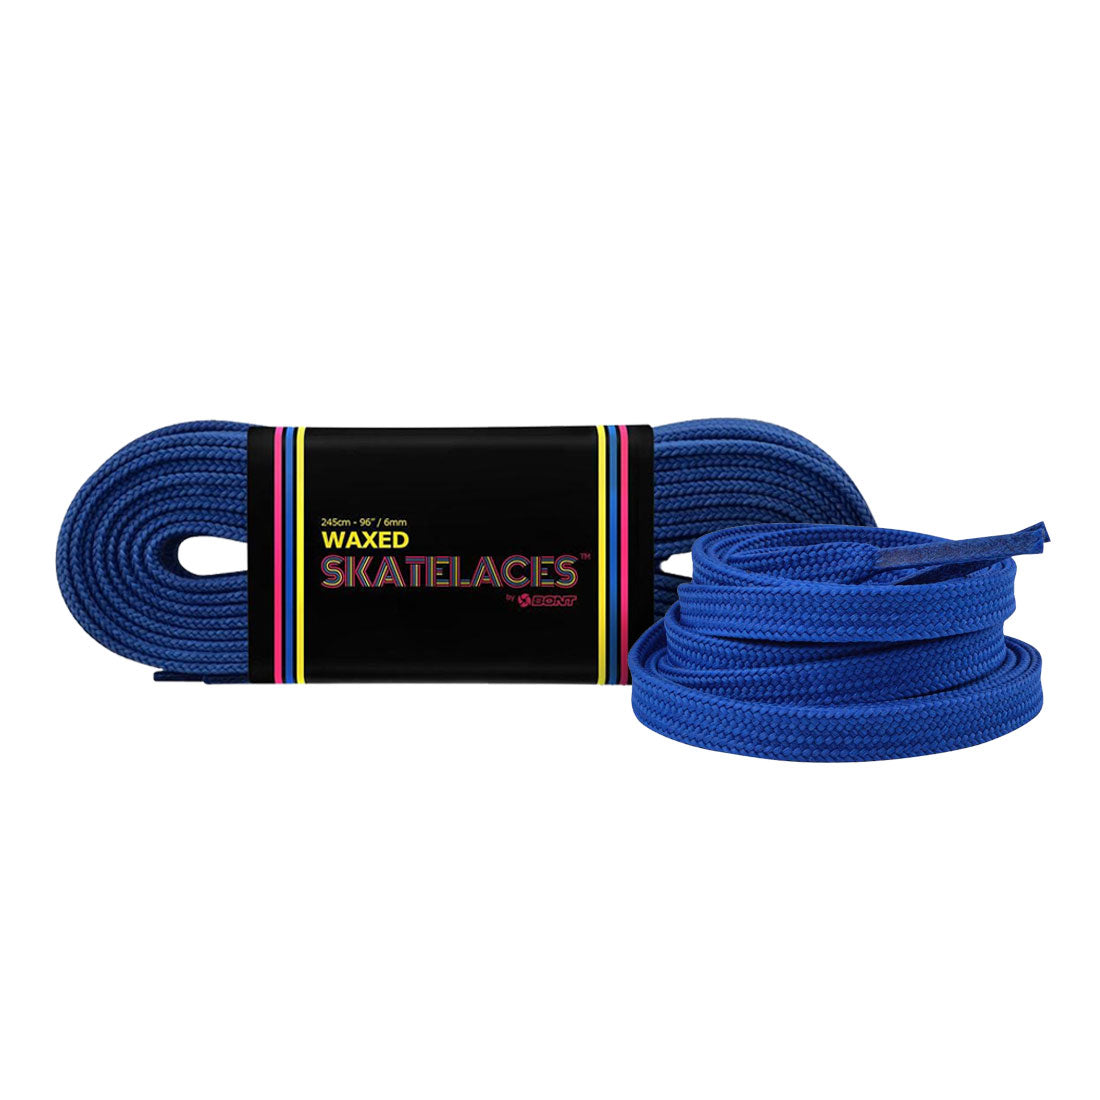 Bont Waxed 6mm Laces - 275cm/108in Mad About You Blue Laces